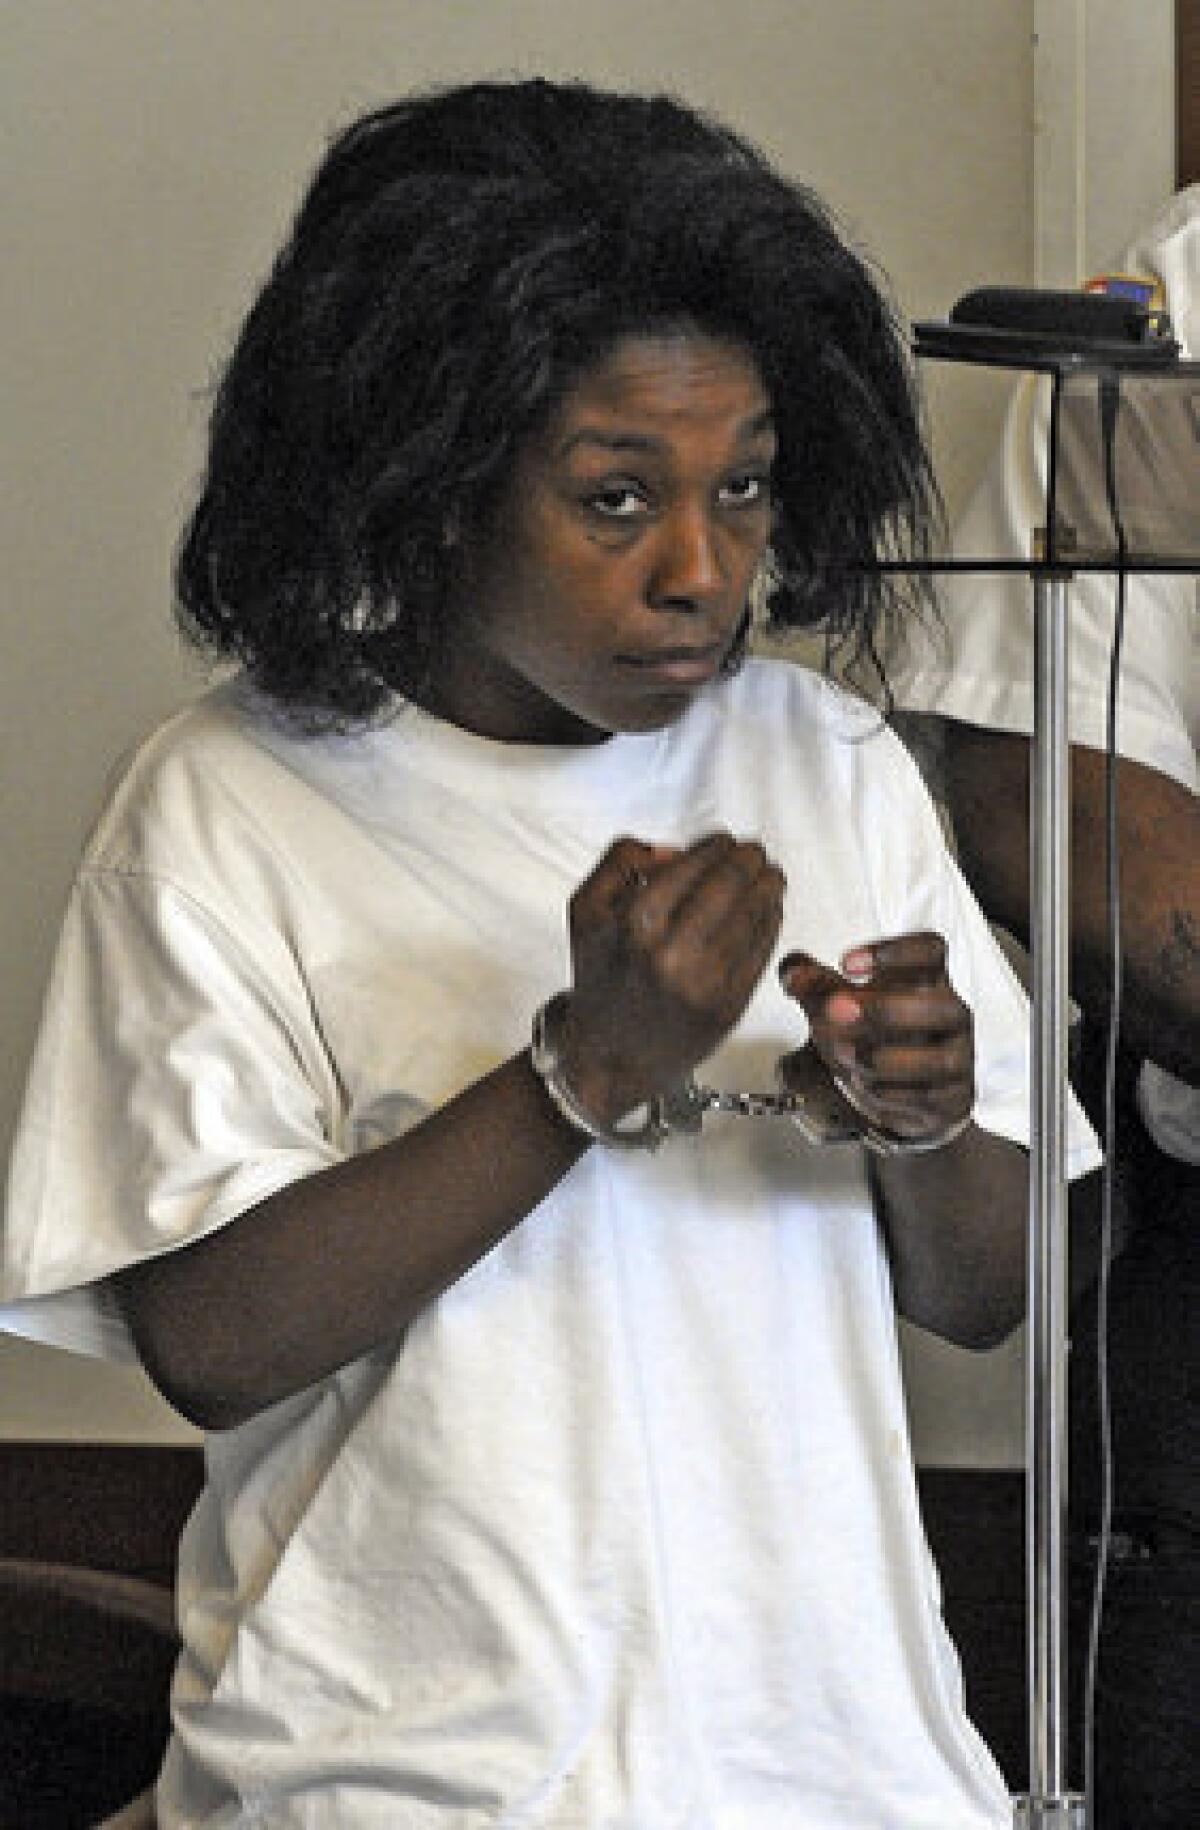 Audrea Gause, 26, of Troy, N.Y., stands during her arraignment Friday, Aug. 2, 2013, in Boston Municipal Court. Gause was charged with filing a false claim for nearly $500,000 with The One Fund Boston, set up to aid Boston Marathon bombing victims.